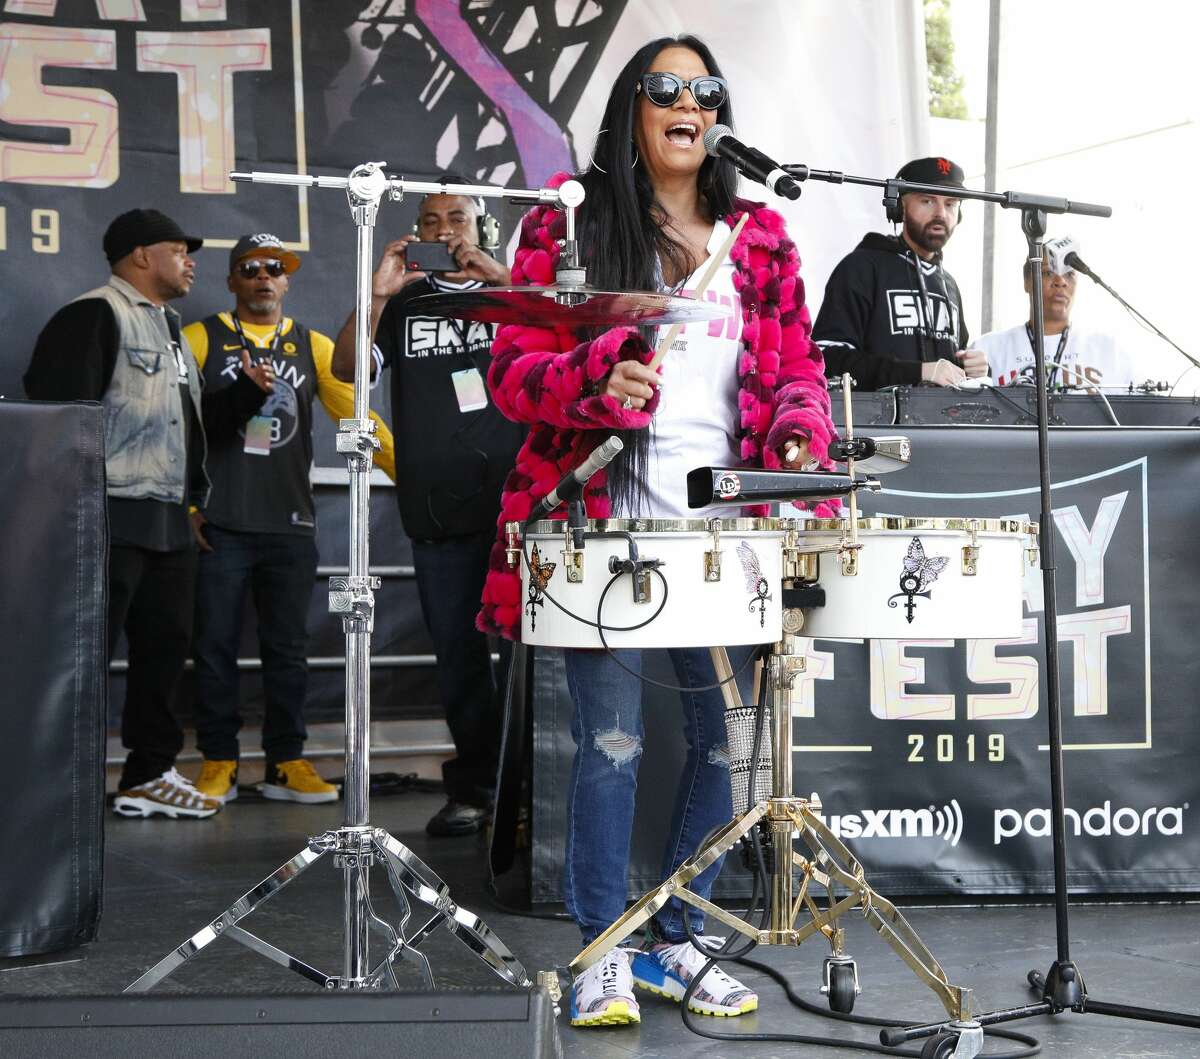 FILE - Sheila E performs at the SiriusXM and Pandora Sway Fest 2019 on Oct. 18, 2019 in Oakland. On Thursday evening, the musician will host "We Stand Together," a music showcase and benefit event for arts programs at Oakland public schools.